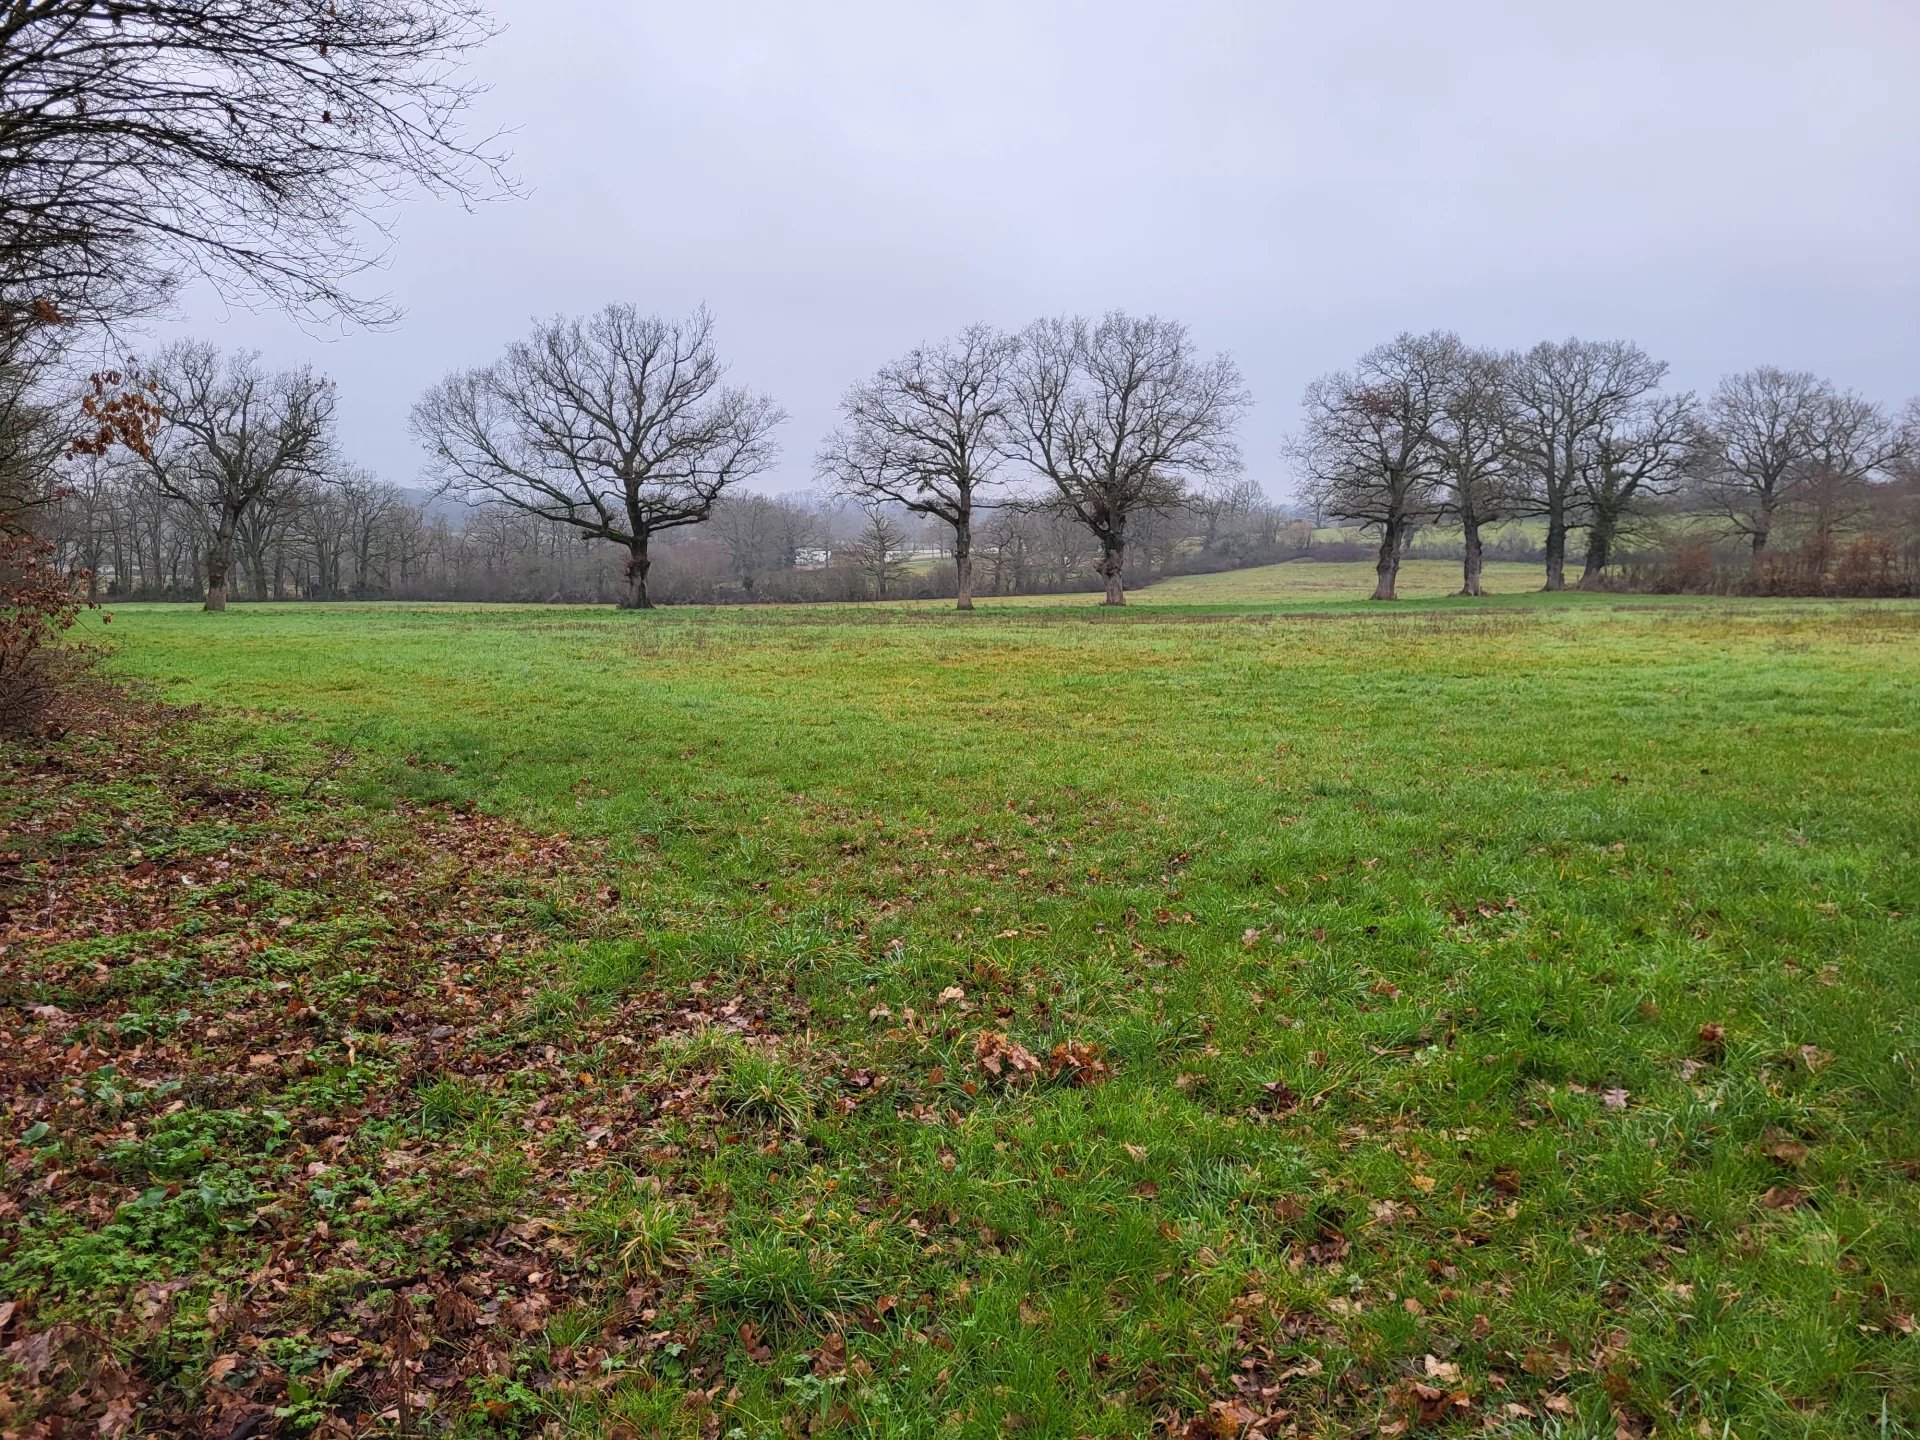 What a campsite opportunity! Dream location with Planning Permission